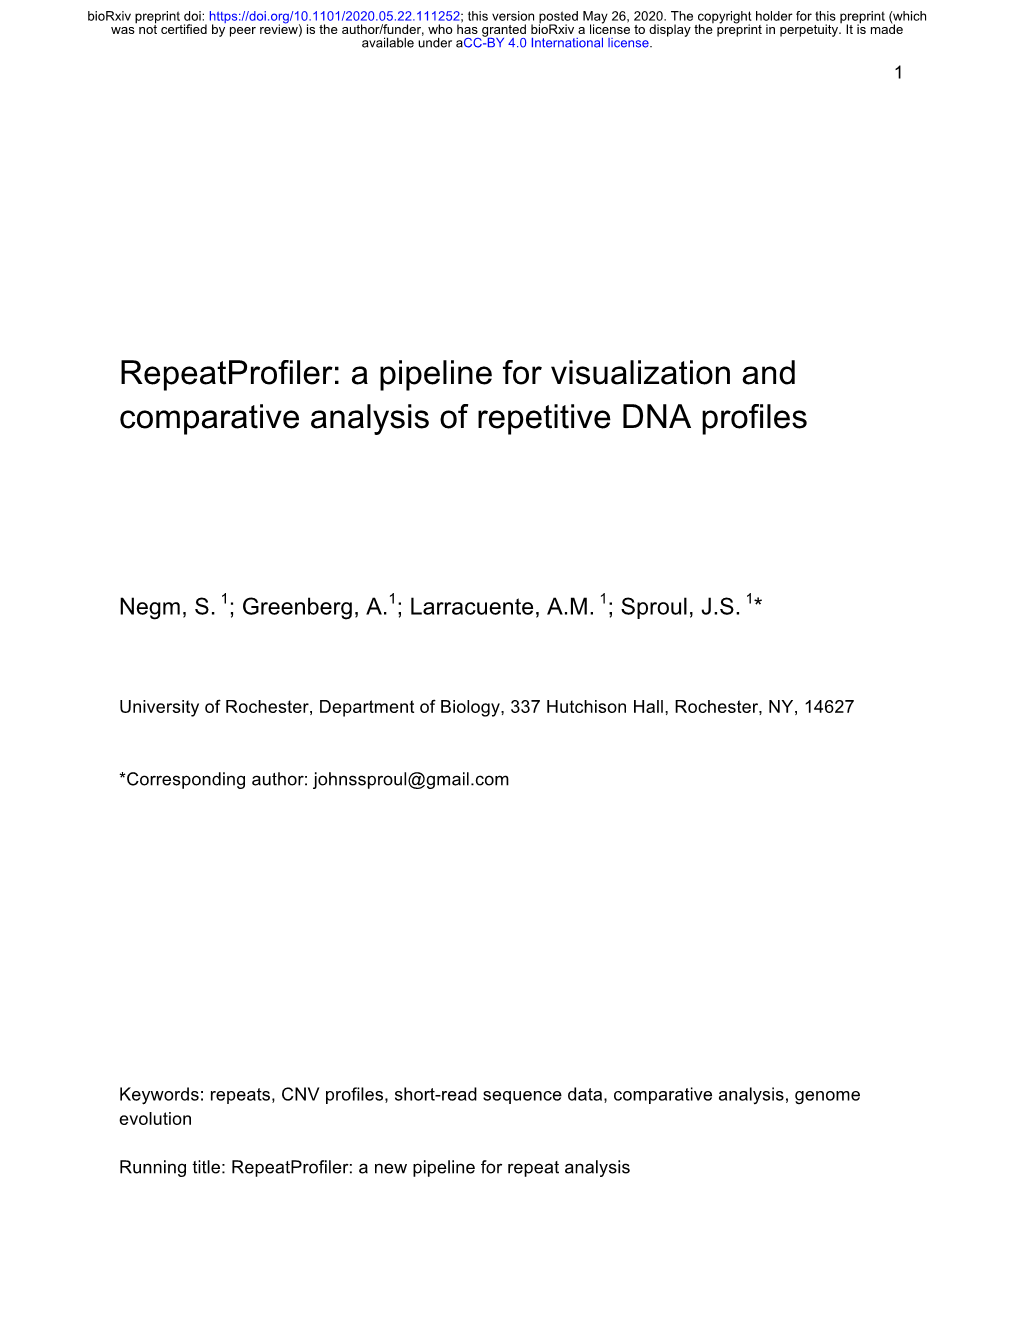 Repeatprofiler: a Pipeline for Visualization and Comparative Analysis of Repetitive DNA Profiles